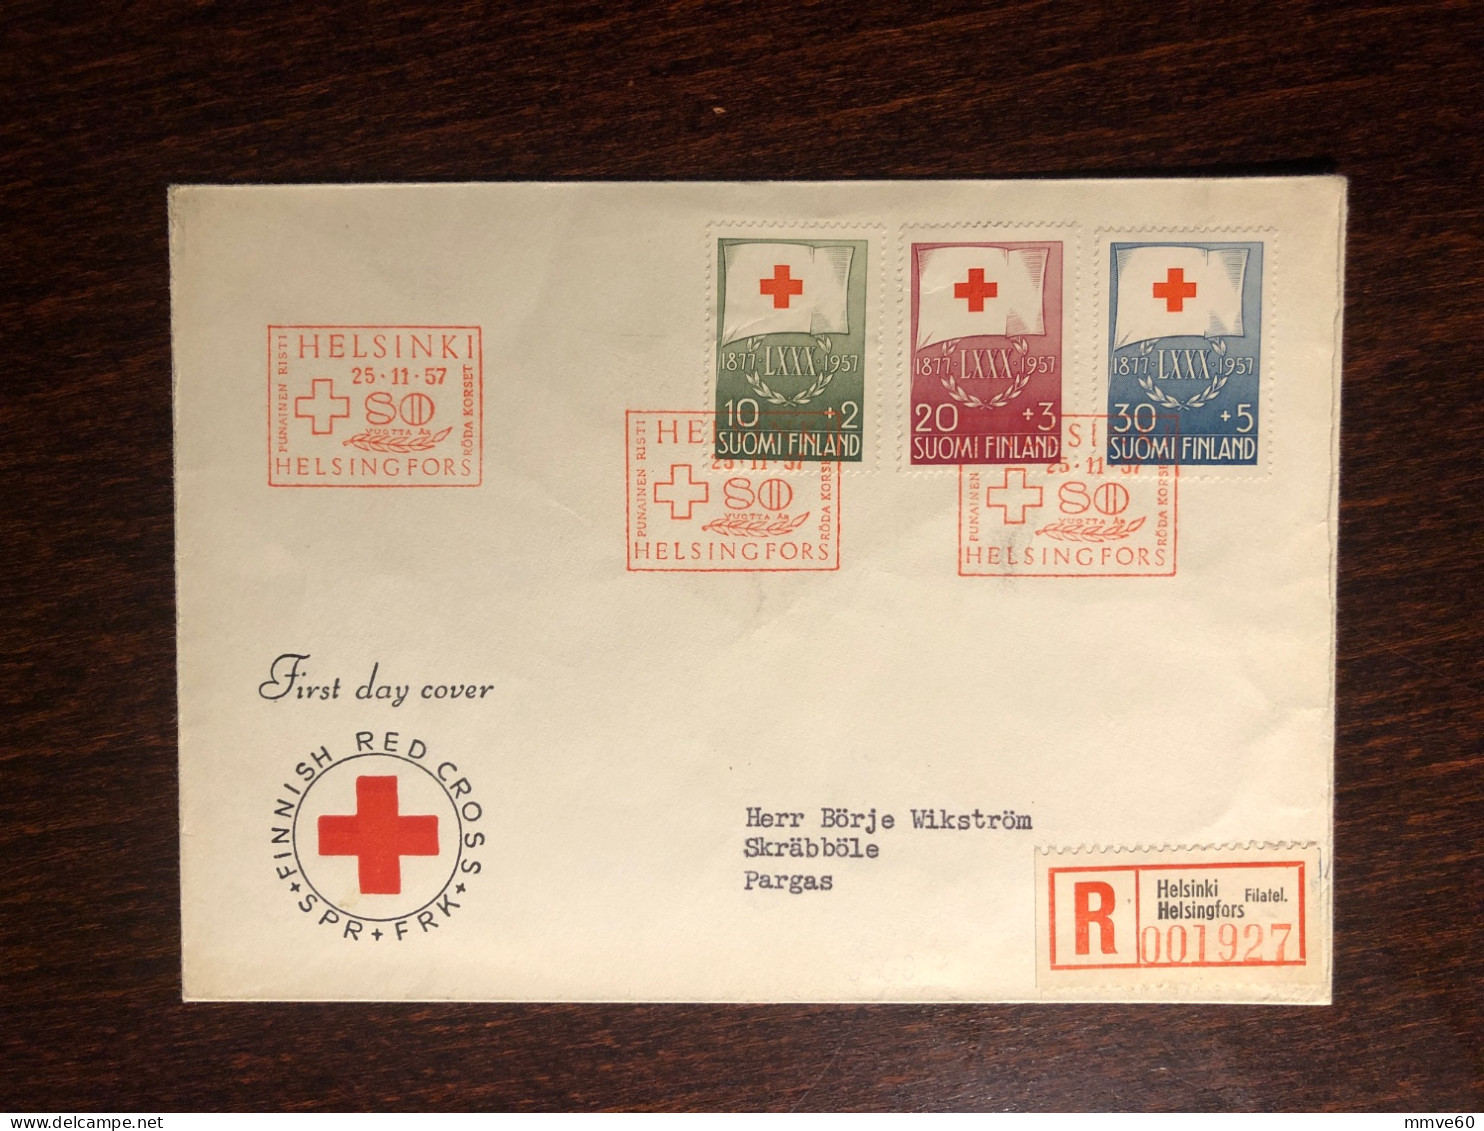 FINLAND FDC COVER 1957 YEAR RED CROSS HEALTH MEDICINE - Lettres & Documents